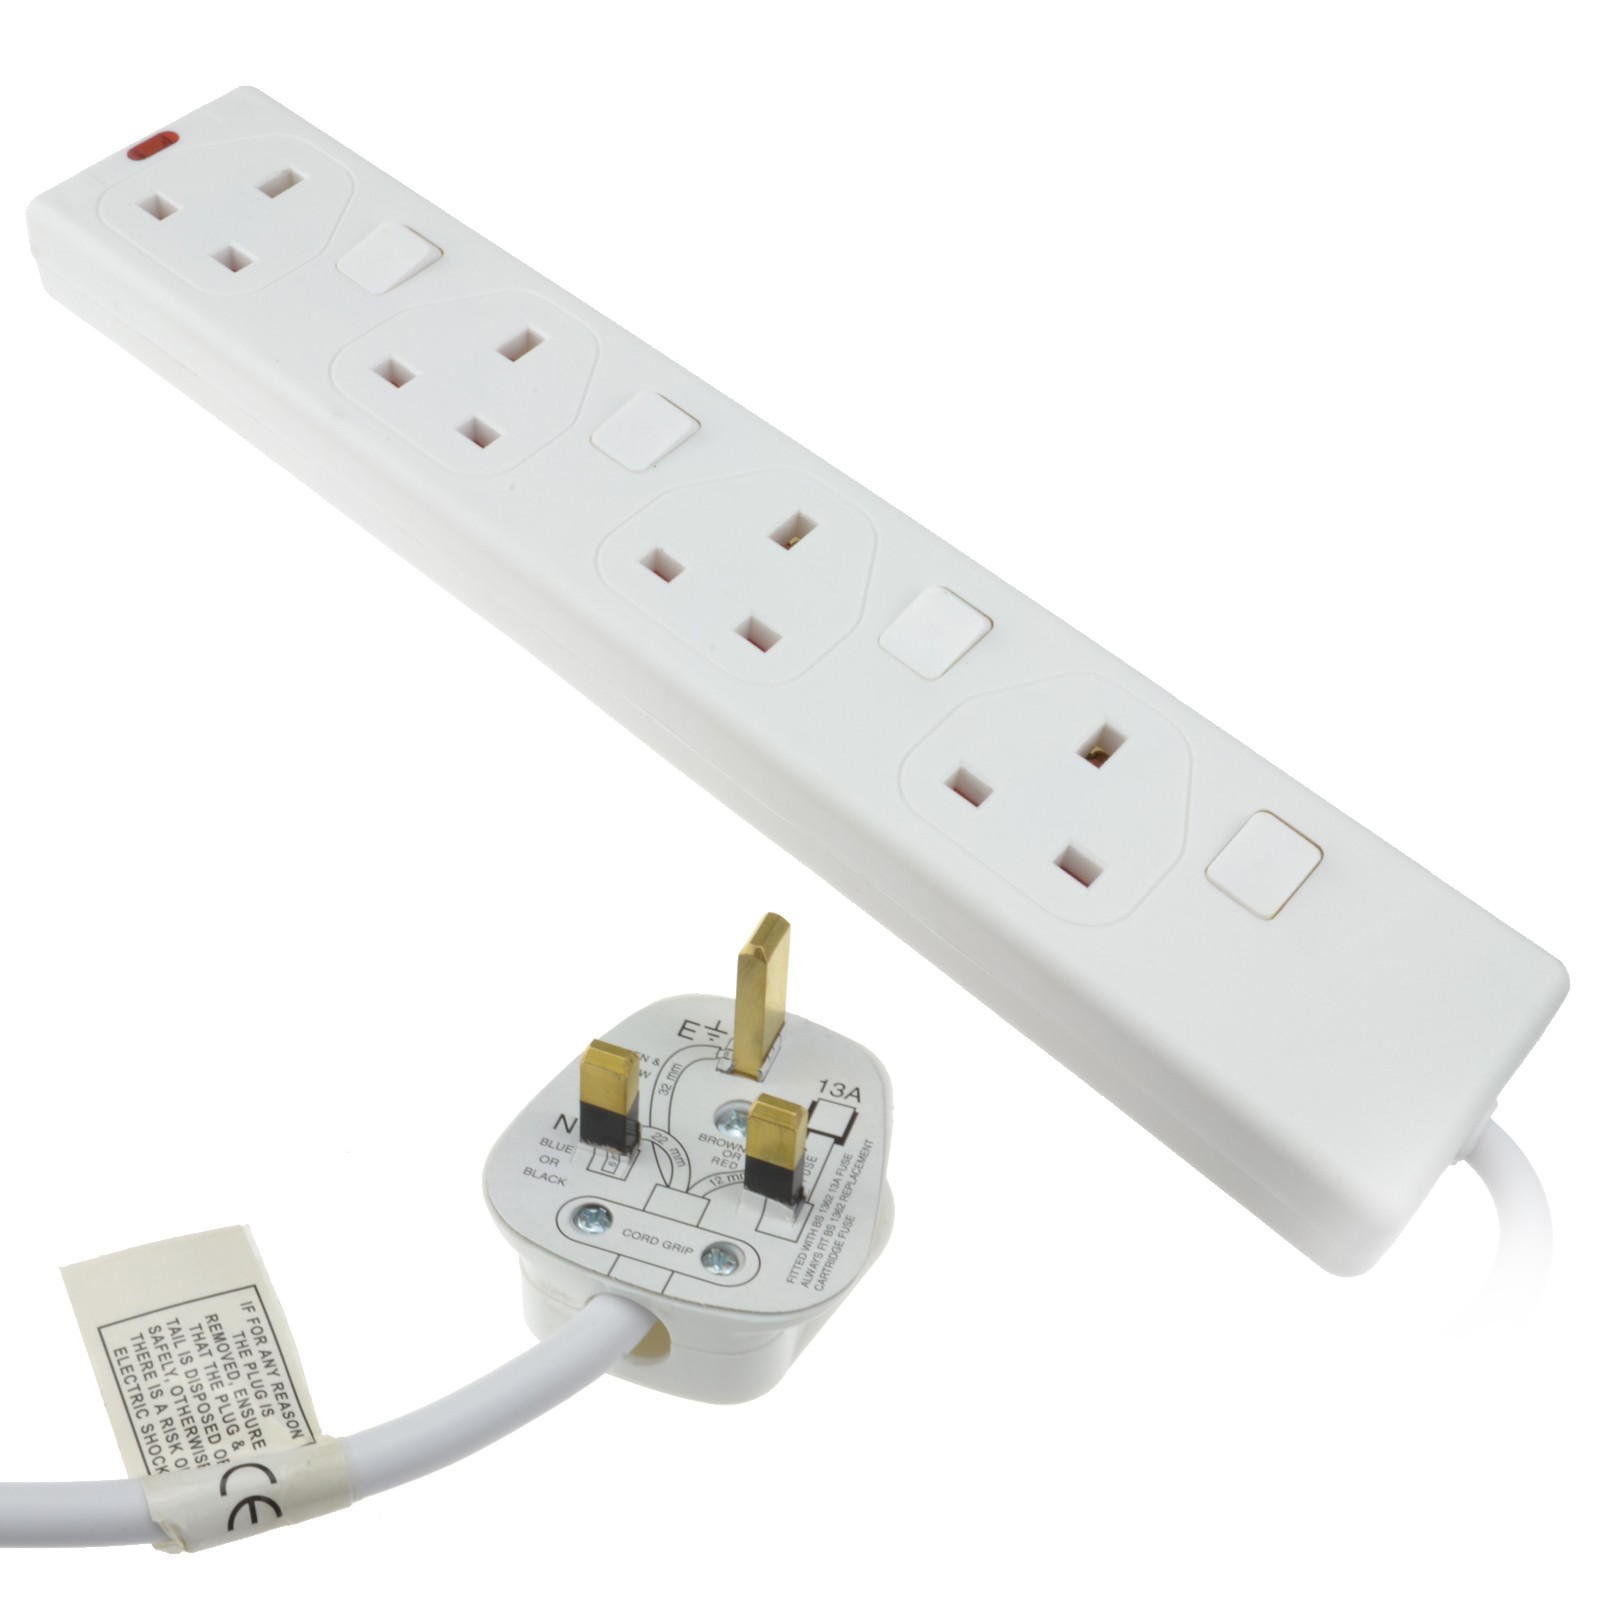 2 Way Gang Extension Socket 13amp 5m Long Lead Cable With Plug White